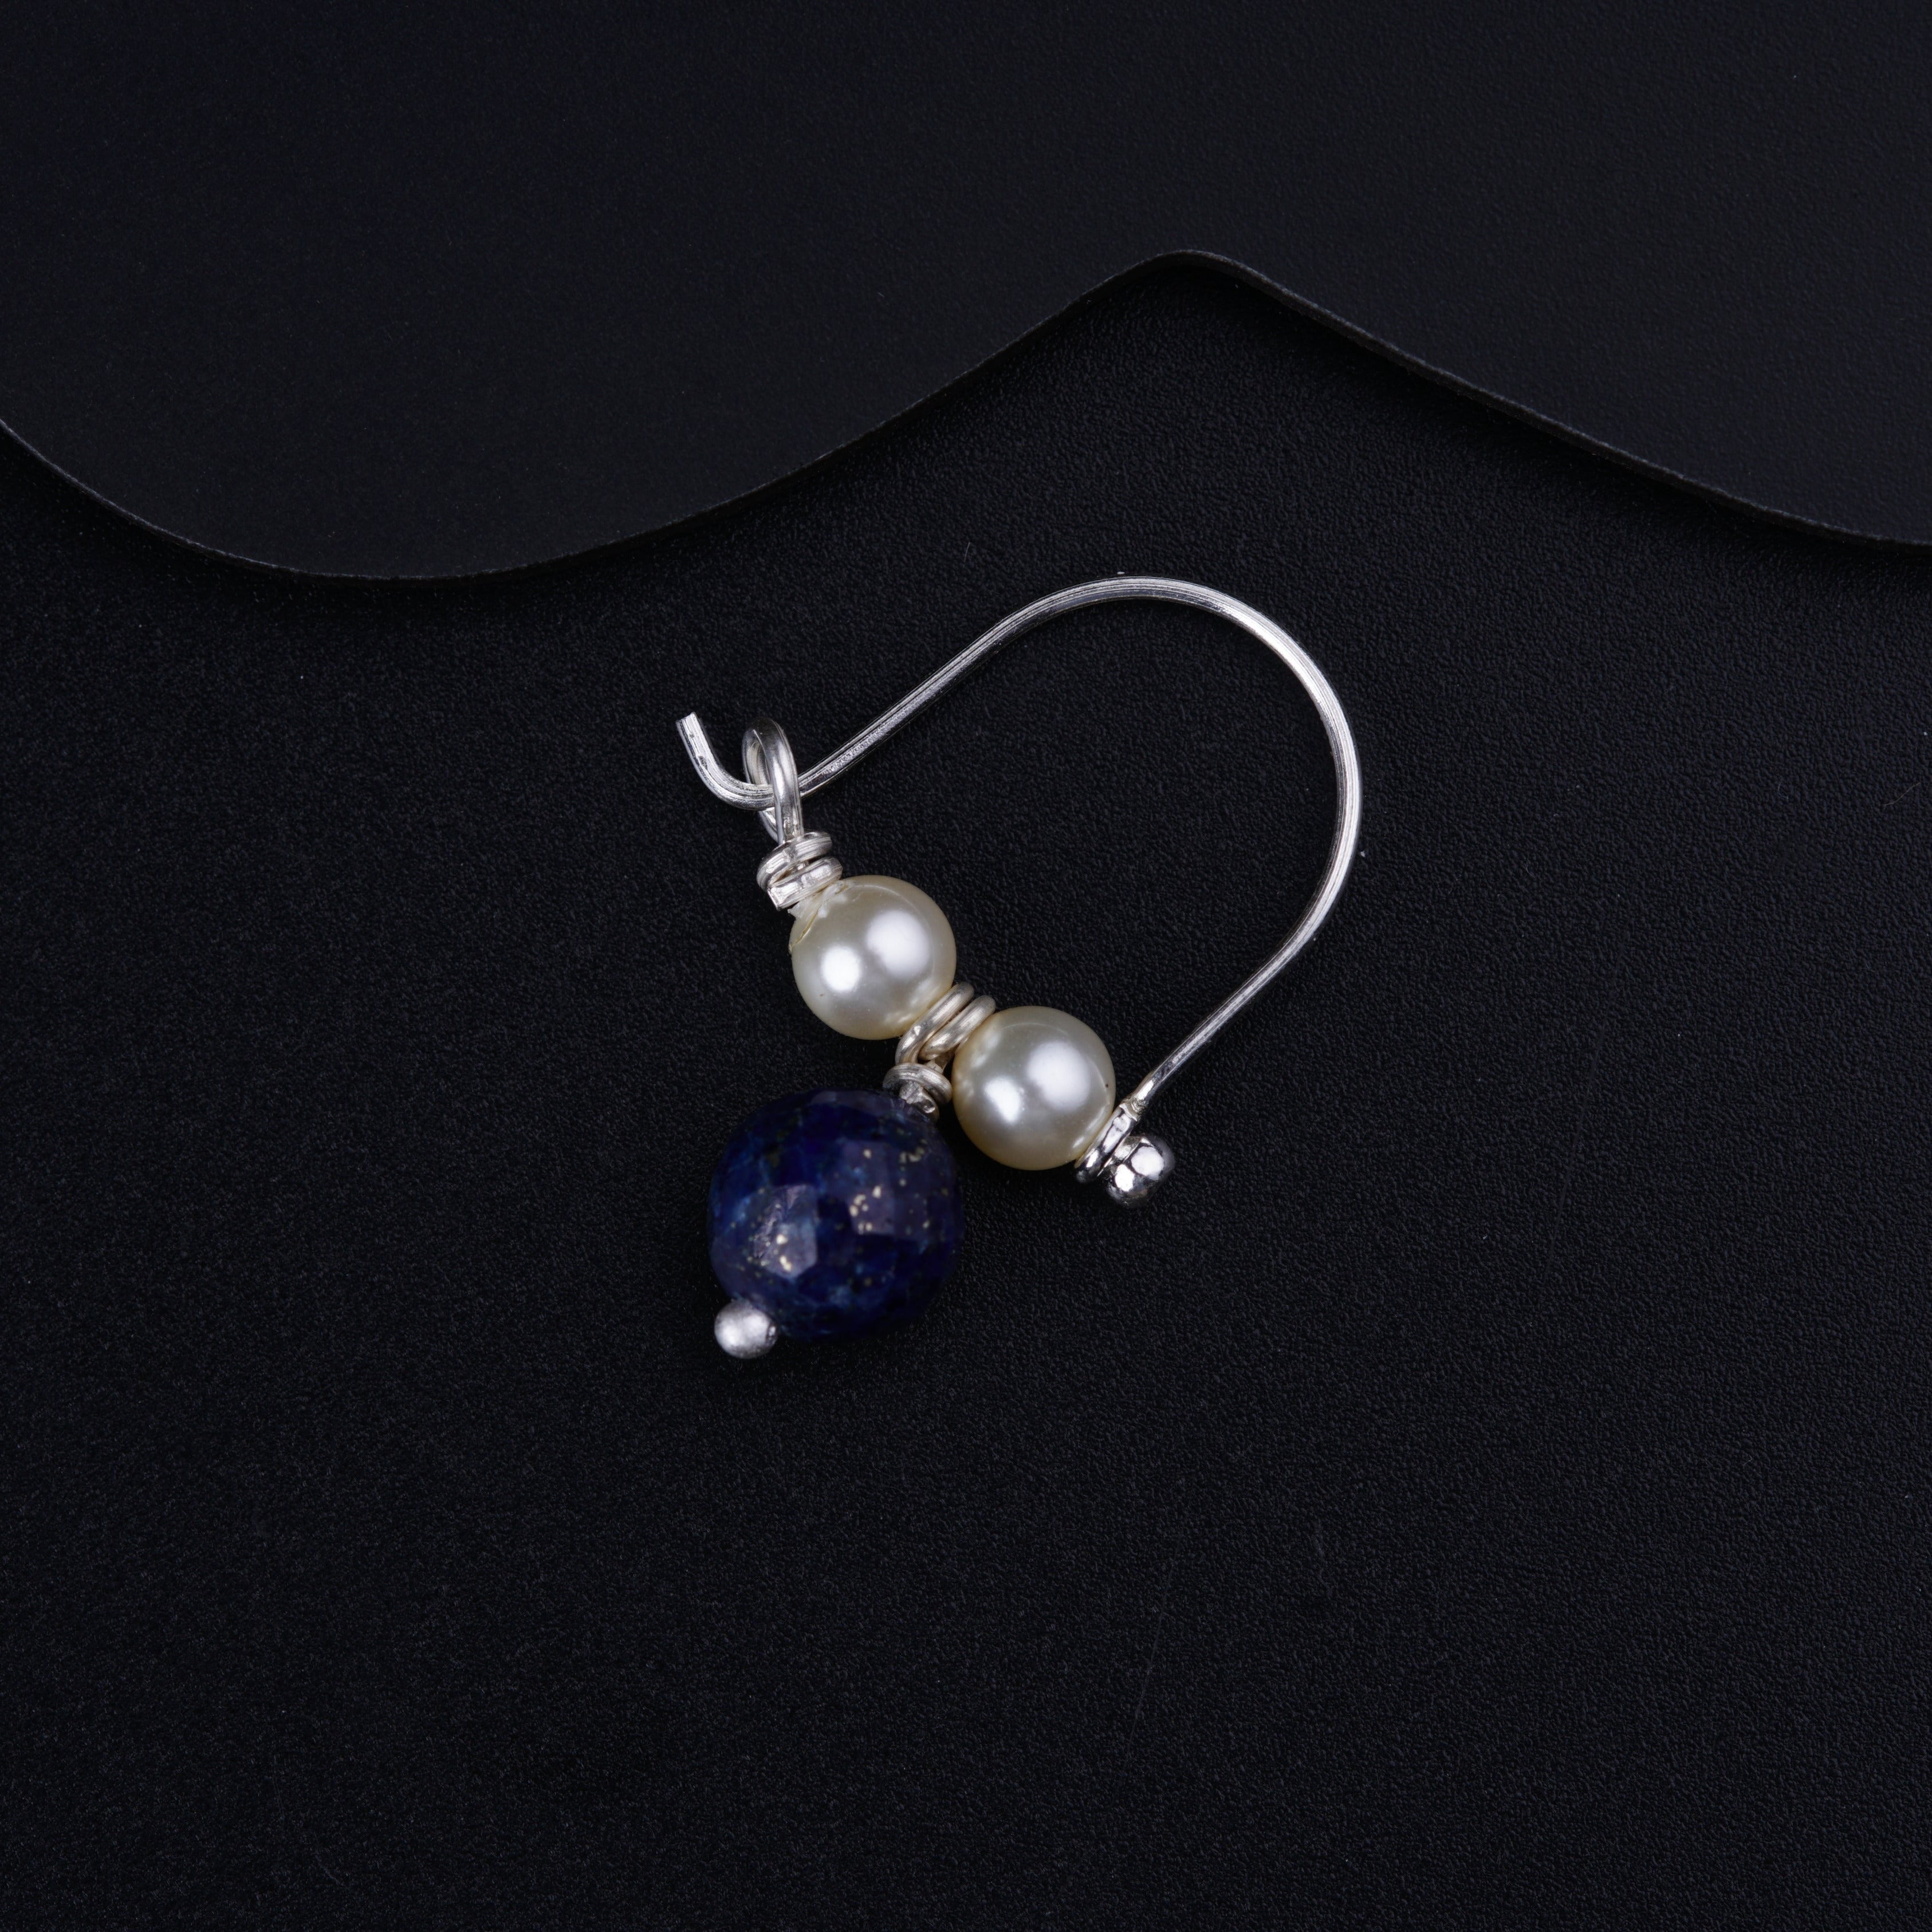 a pair of earrings with pearls and lapis